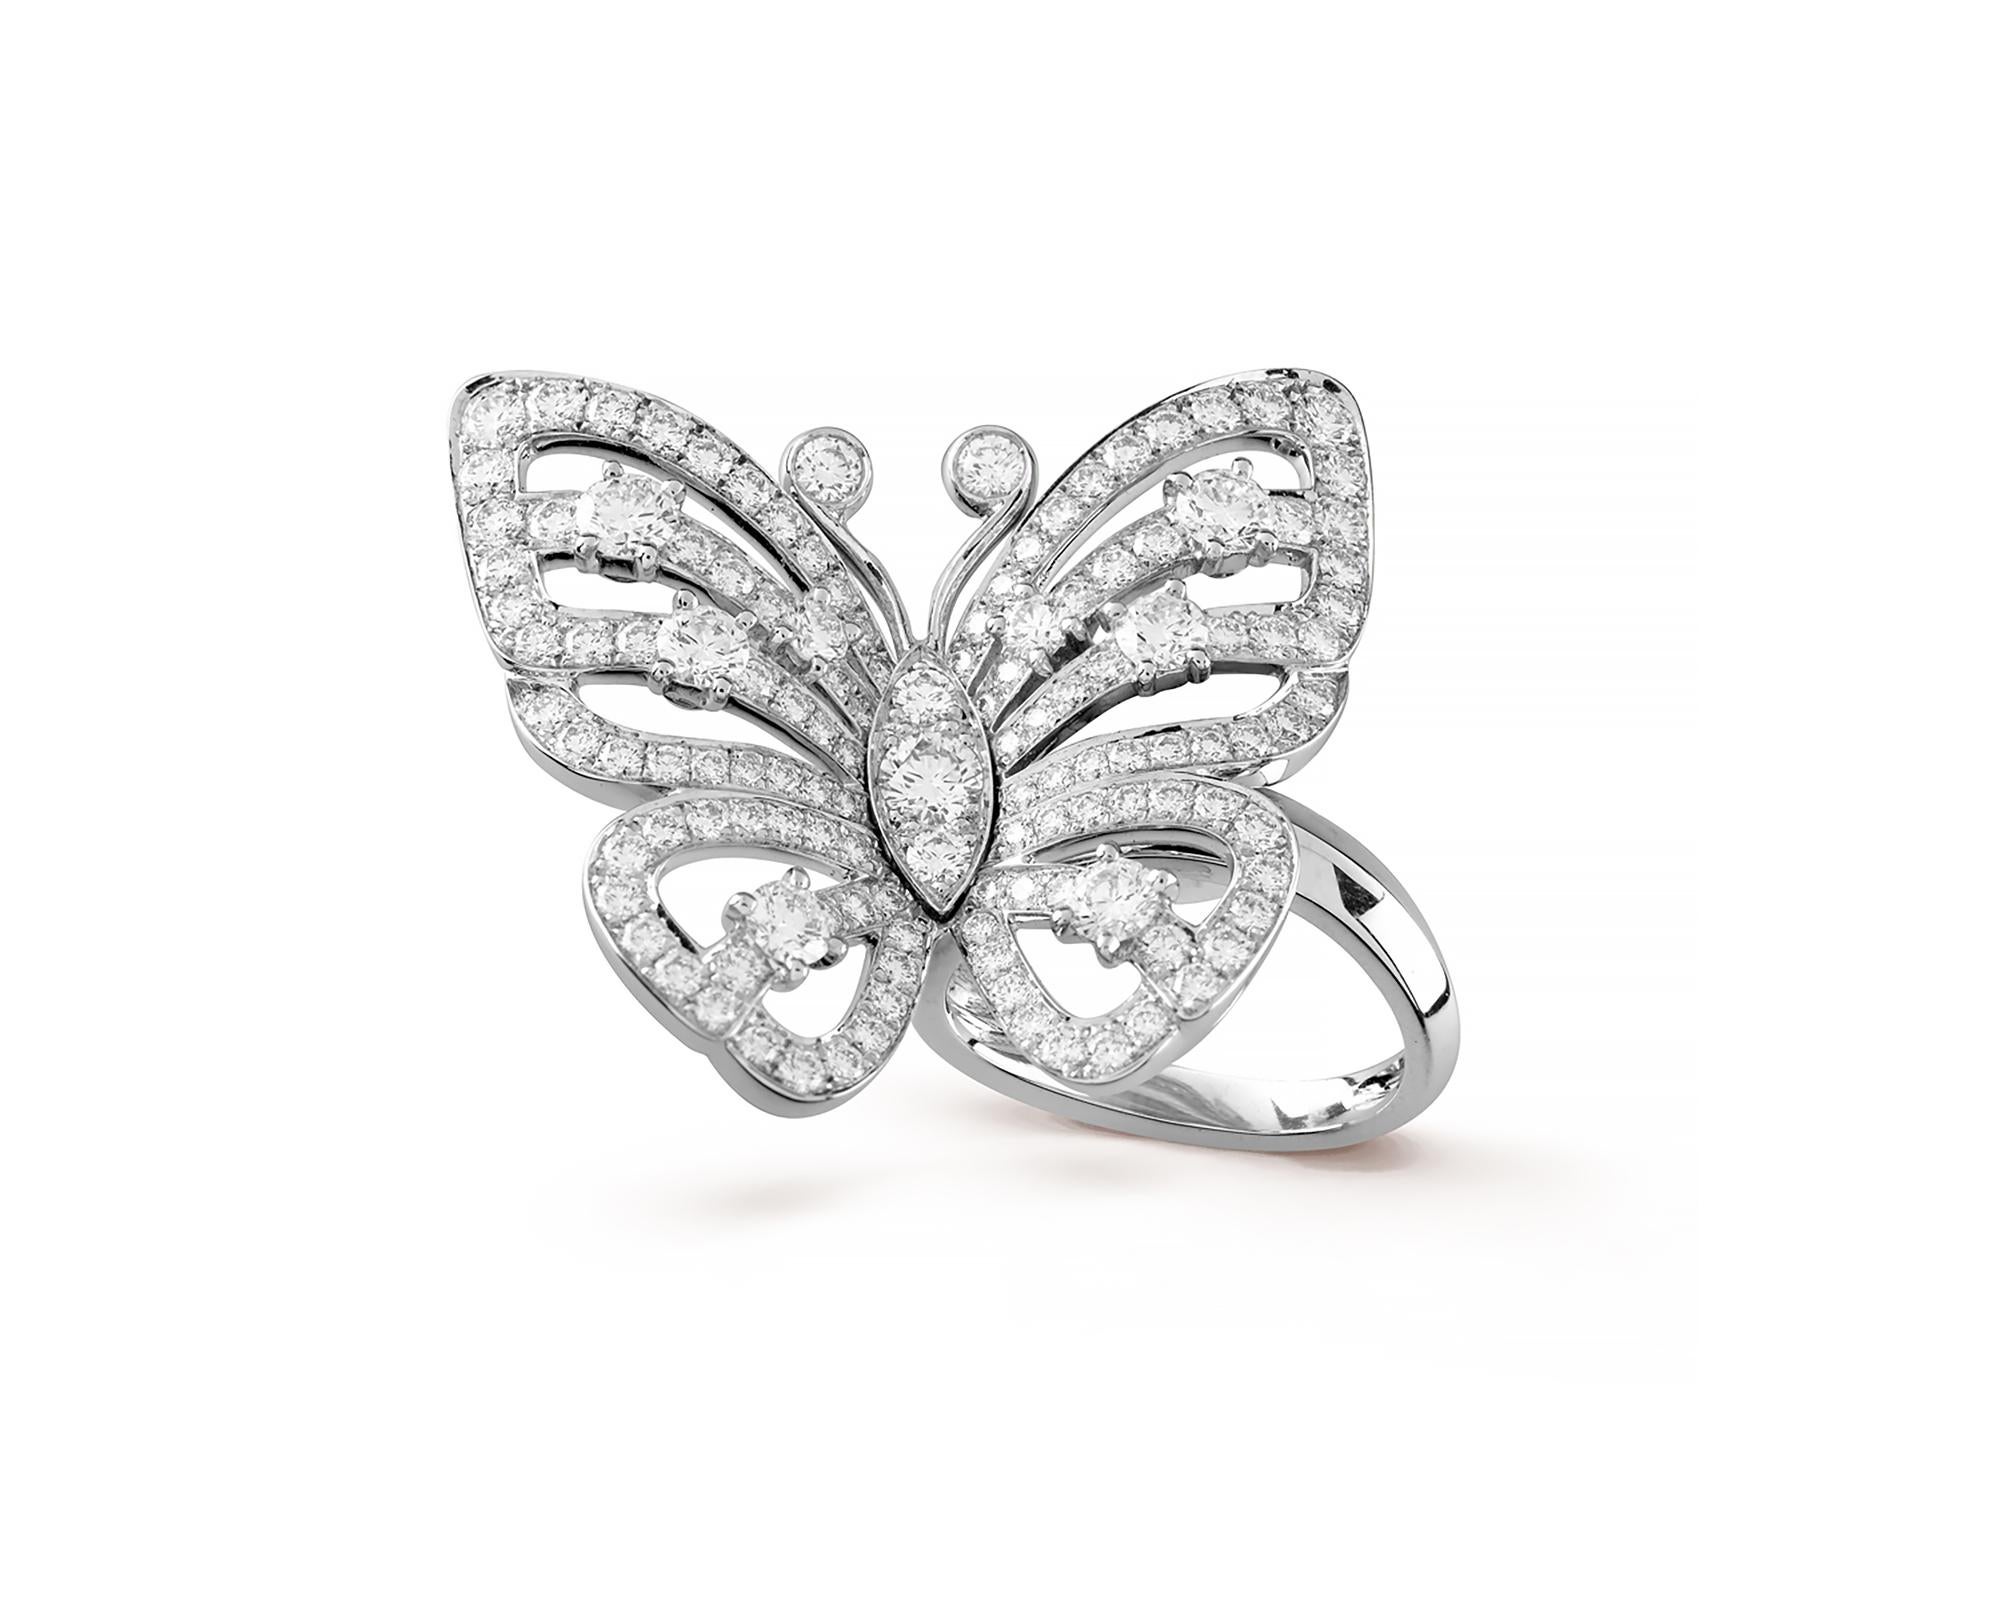 Flying butterfly between-the-finger ring created by Van Cleef & Arpels.
Set with white round diamonds in 18K white gold. 
The diamonds are equivalent to E-F colors, VS clarity. 
Weight of the ring is 13.88 grams.
The ring comes with the paper &